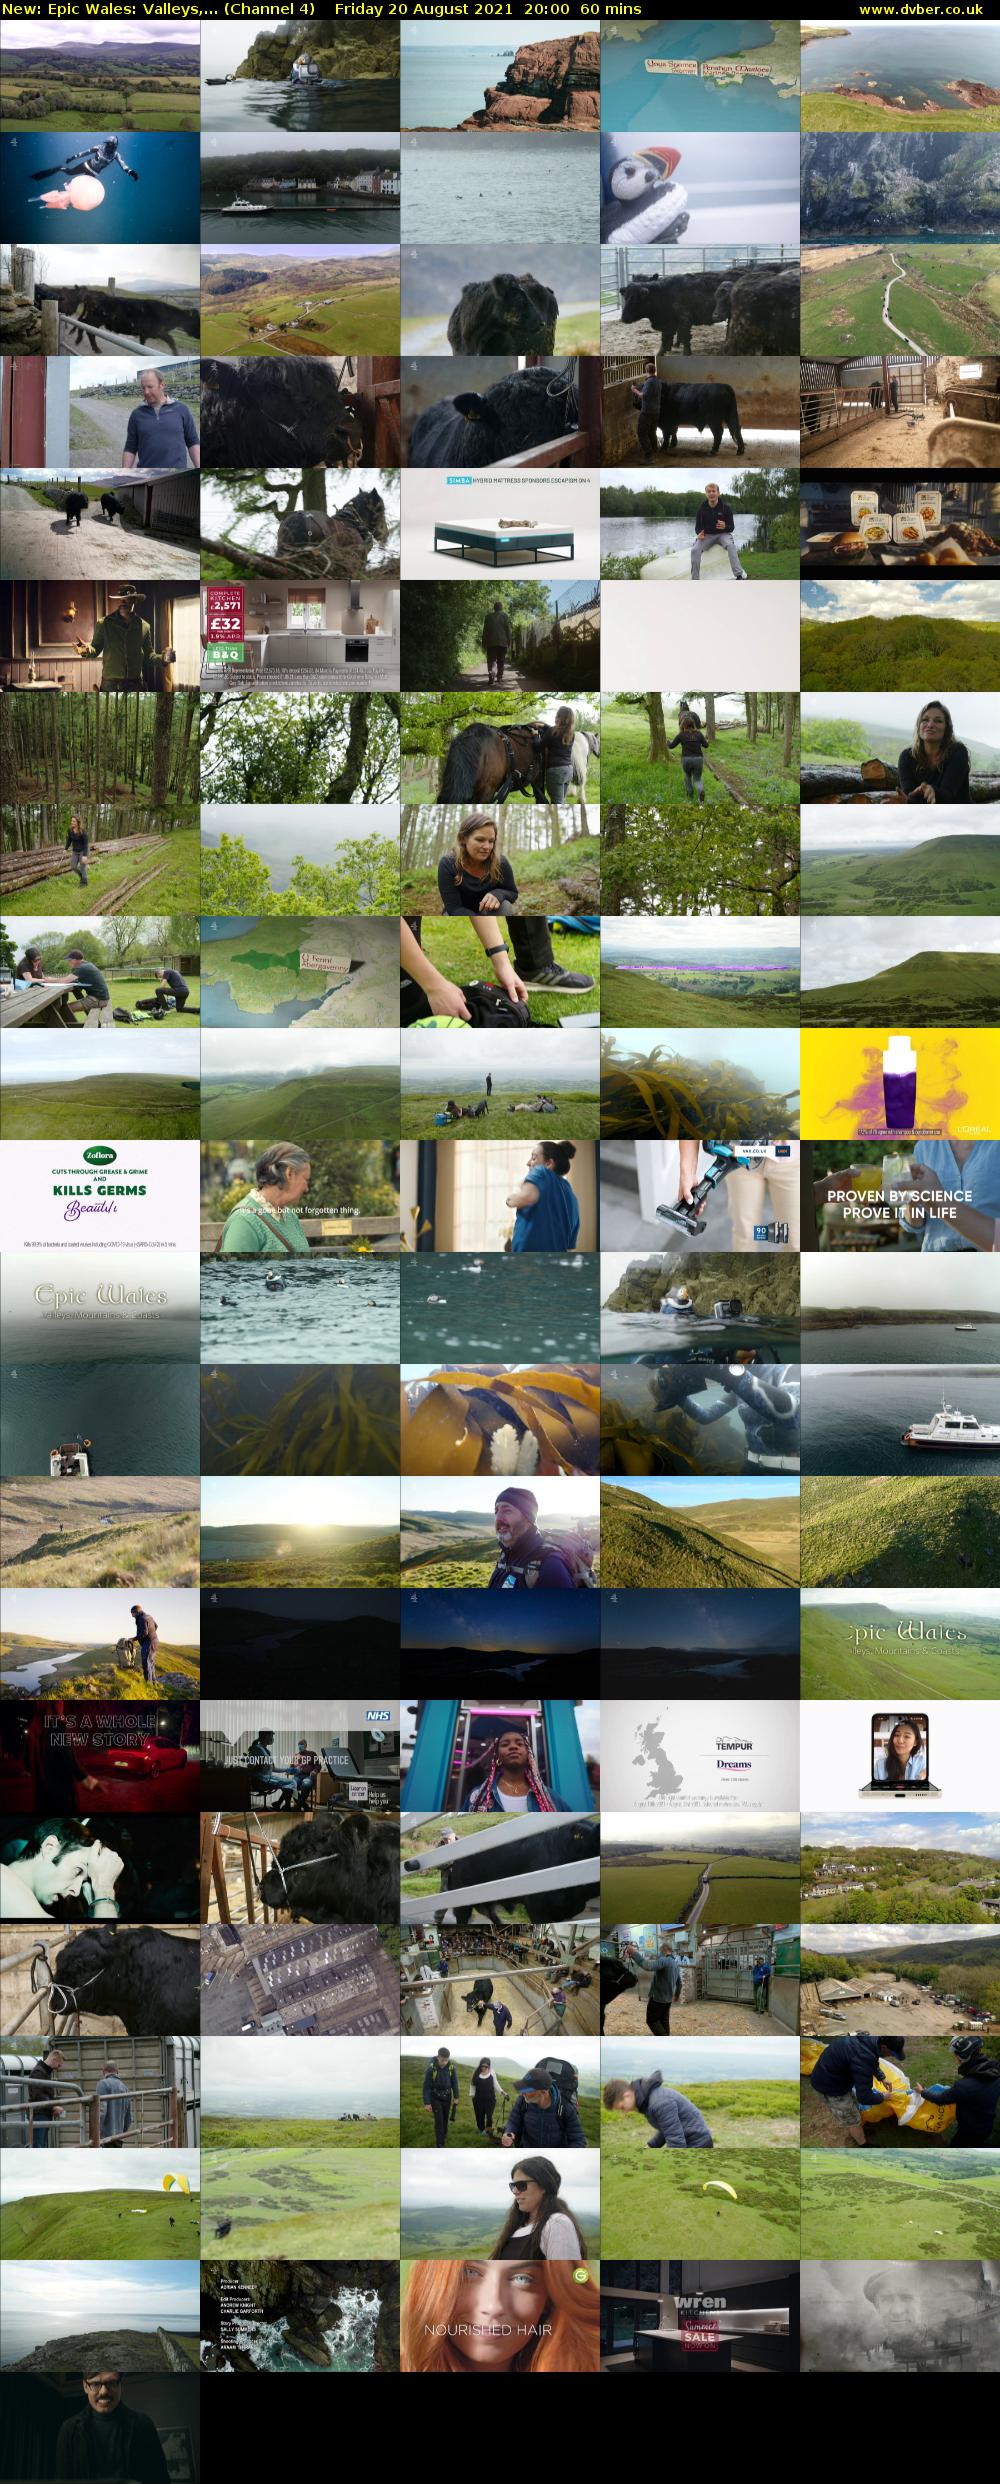 Epic Wales: Valleys,... (Channel 4) Friday 20 August 2021 20:00 - 21:00